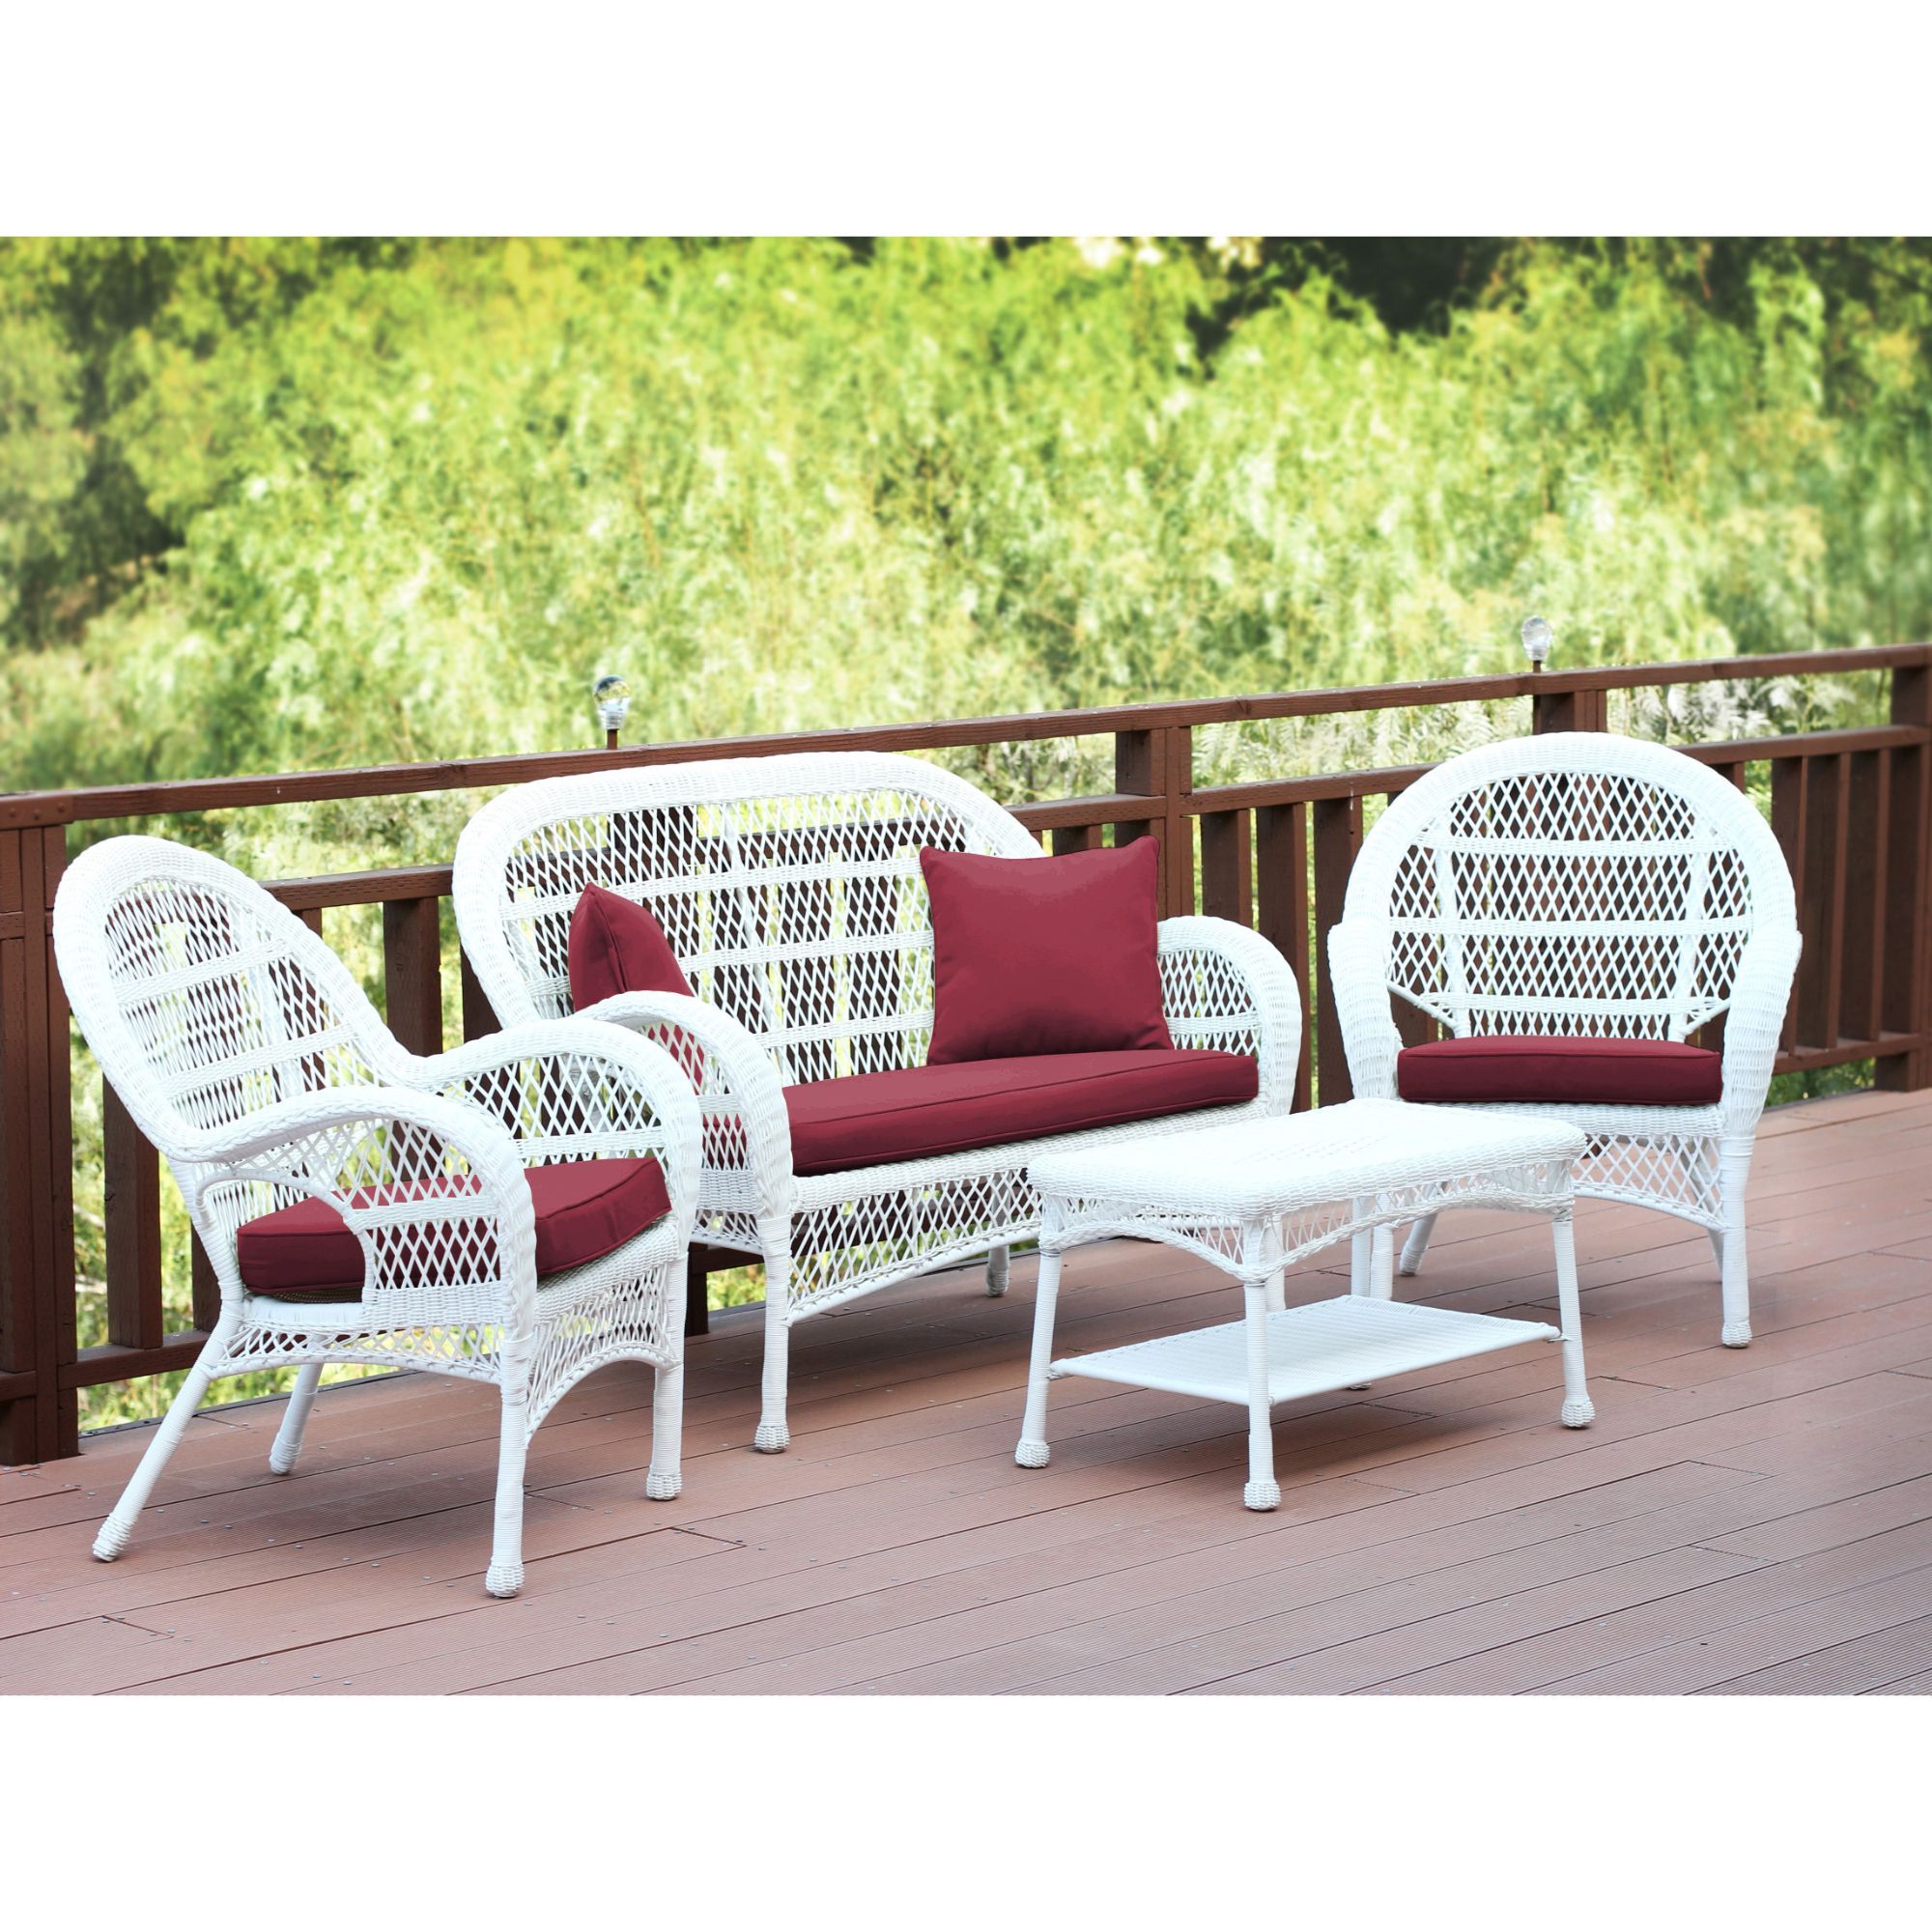 4 Piece Outdoor Sectional Patio Sets Within Latest 4 Piece White Wicker Outdoor Furniture Patio Conversation Set – Red (View 14 of 15)